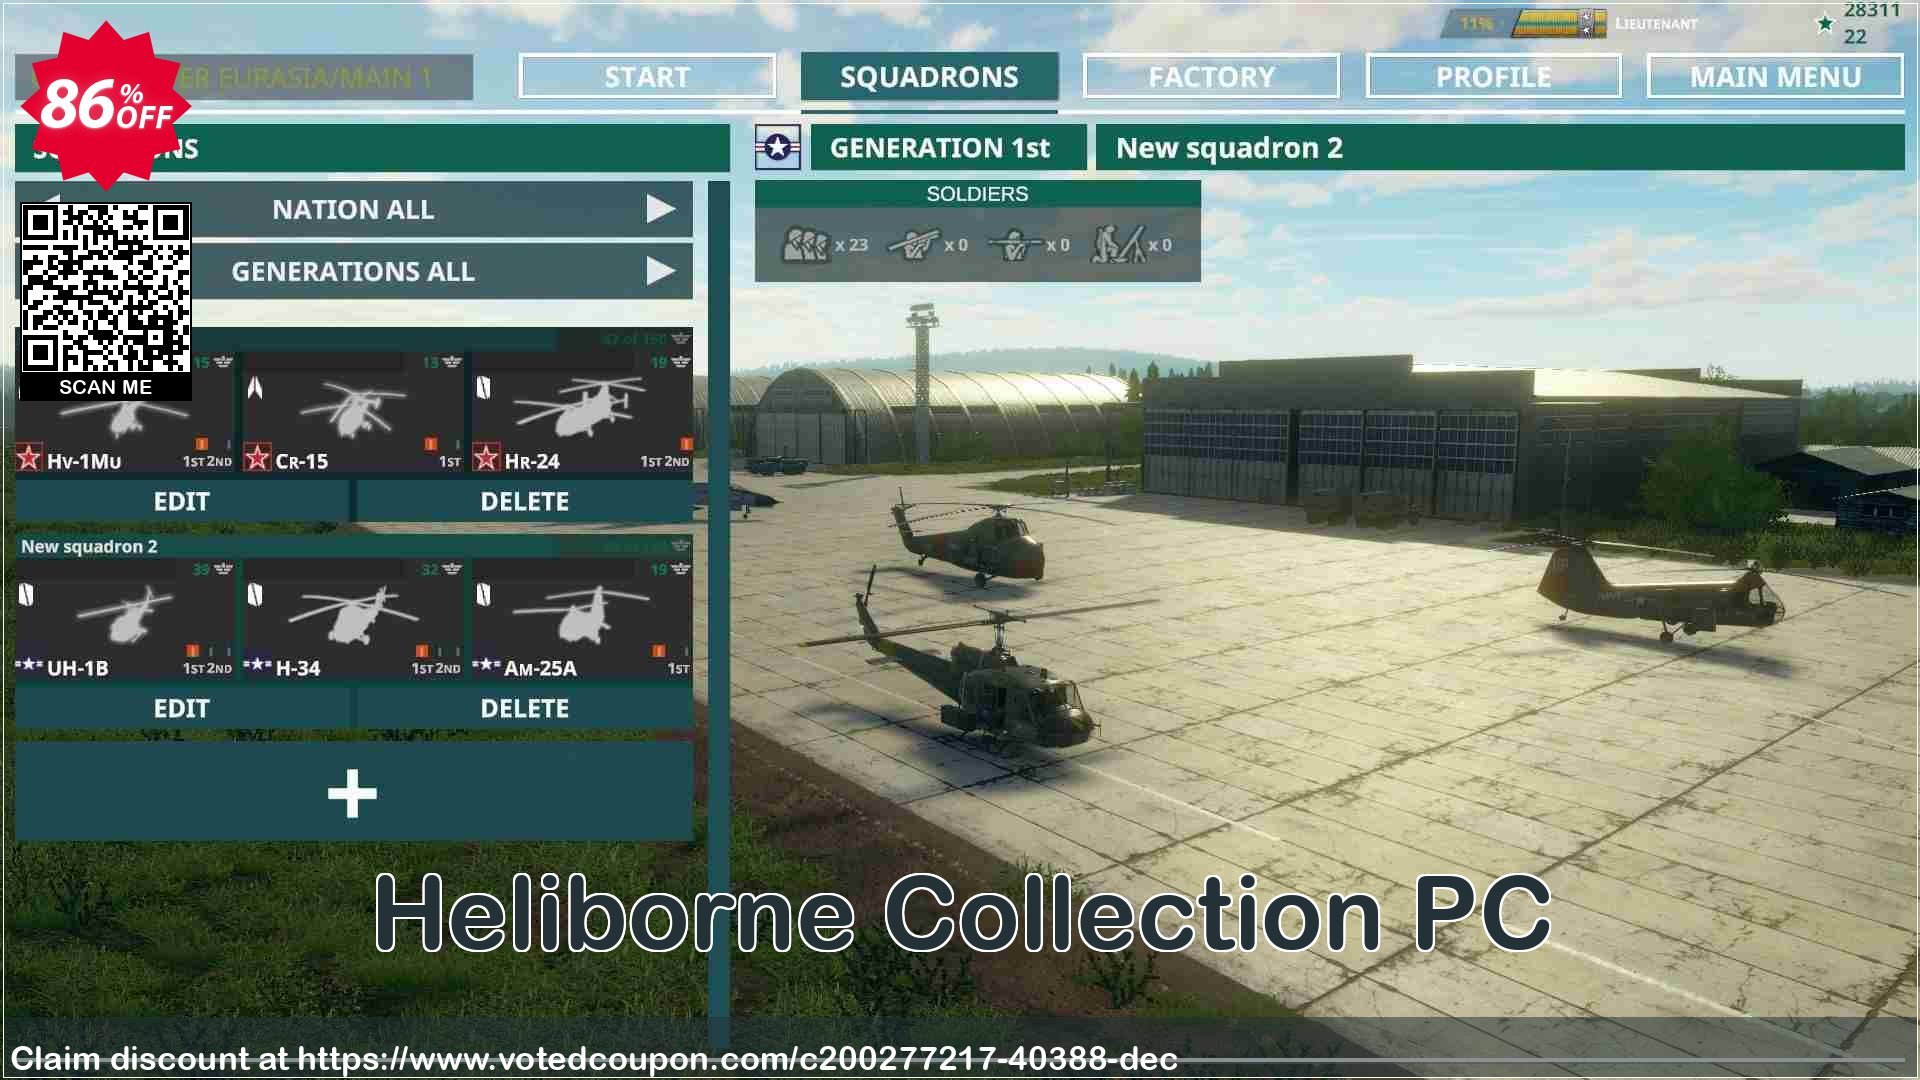 Heliborne Collection PC Coupon Code May 2024, 86% OFF - VotedCoupon